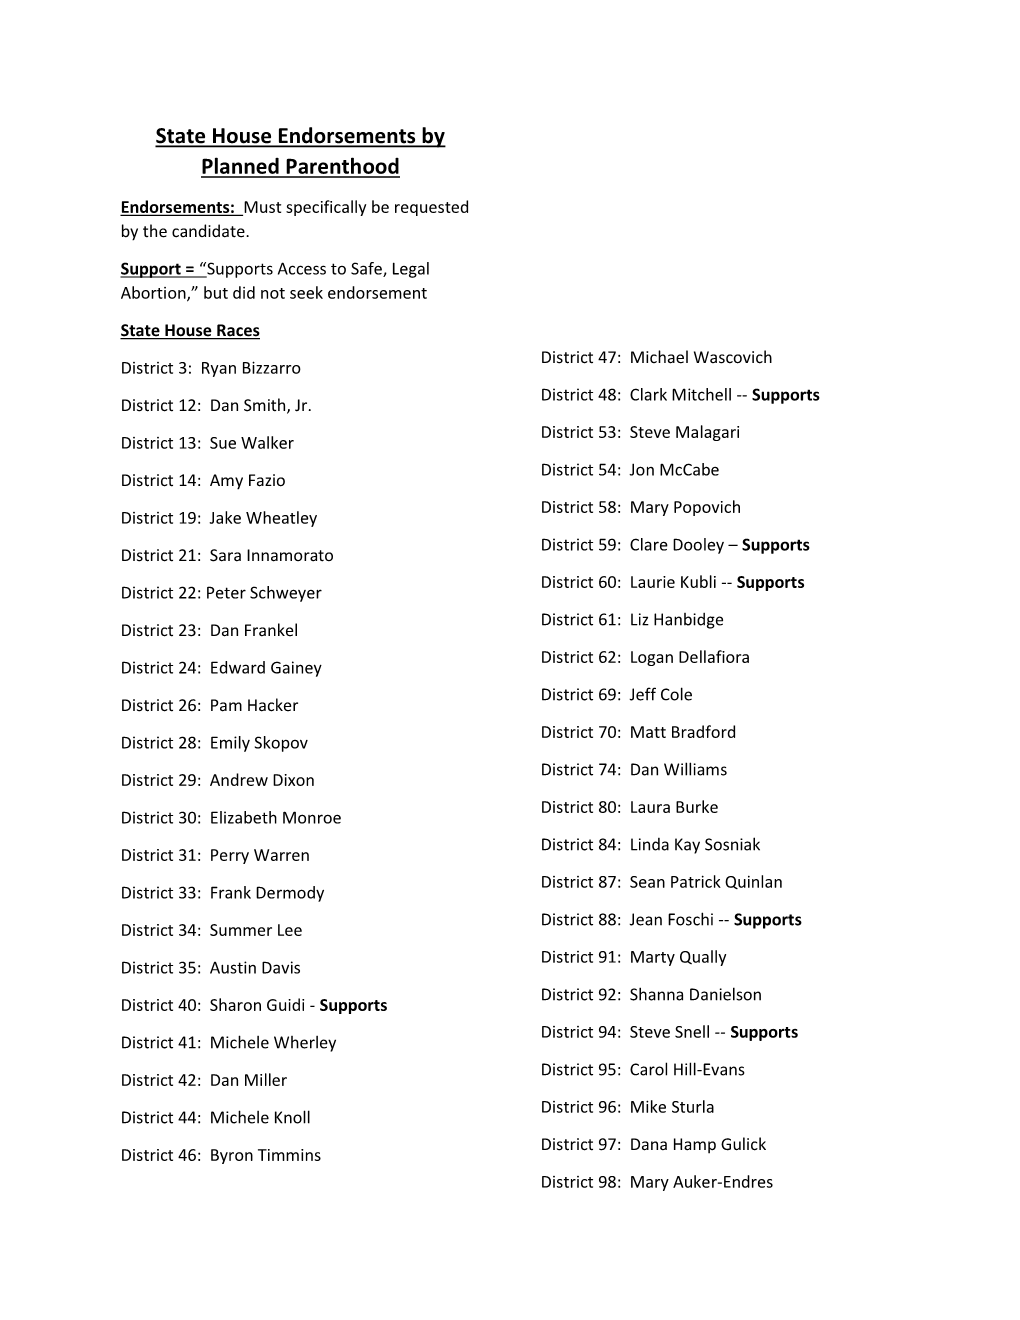 State House Endorsements by Planned Parenthood